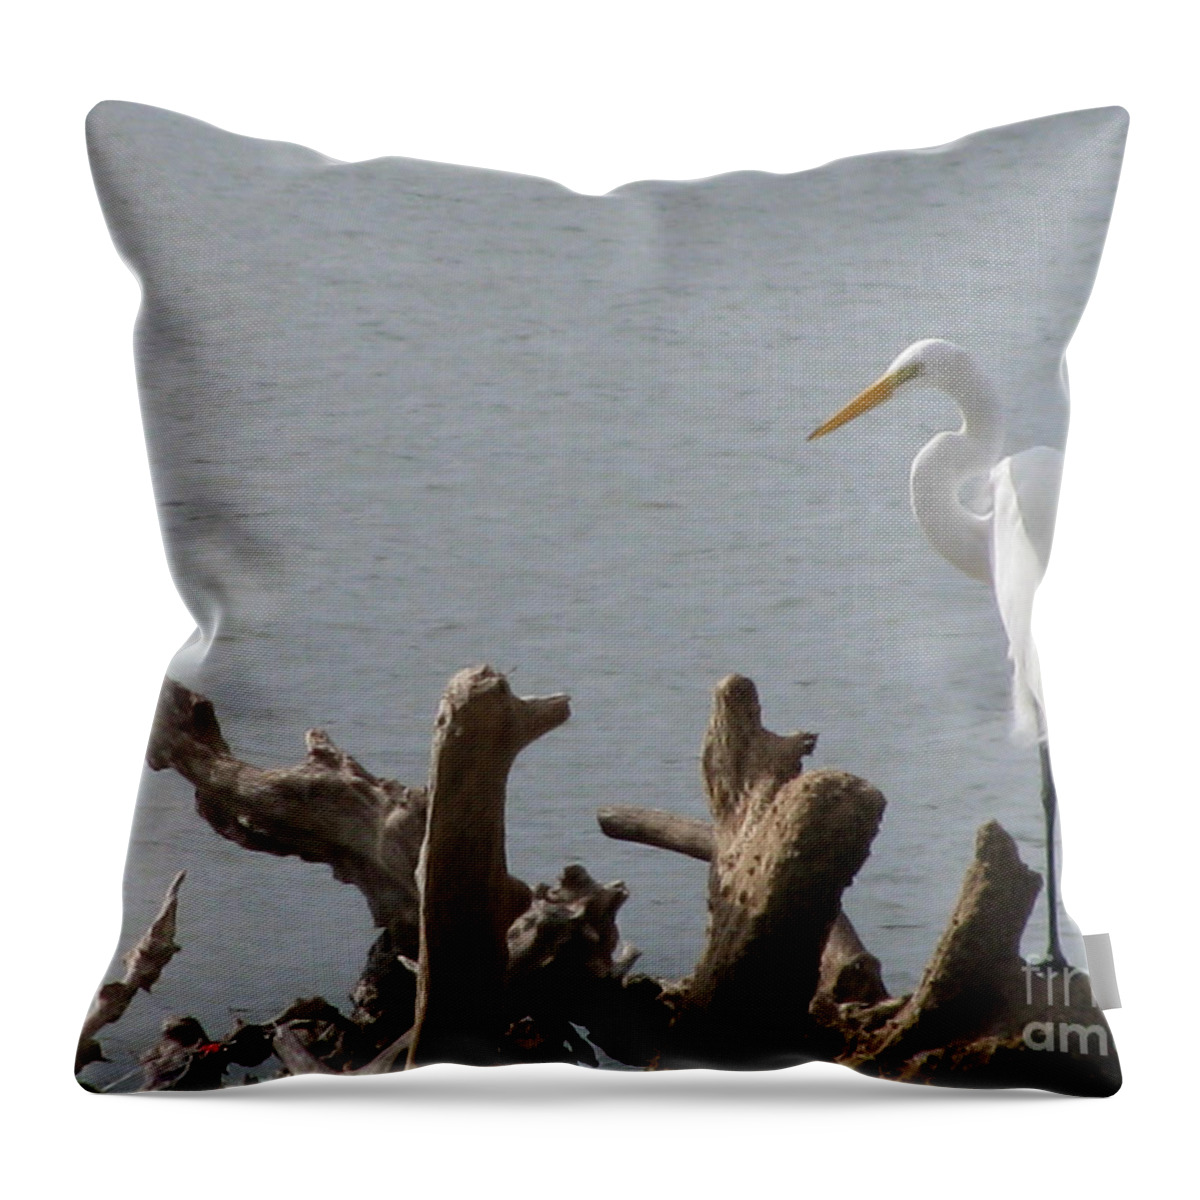 White Egret Throw Pillow featuring the photograph White Egret by Jimmie Bartlett